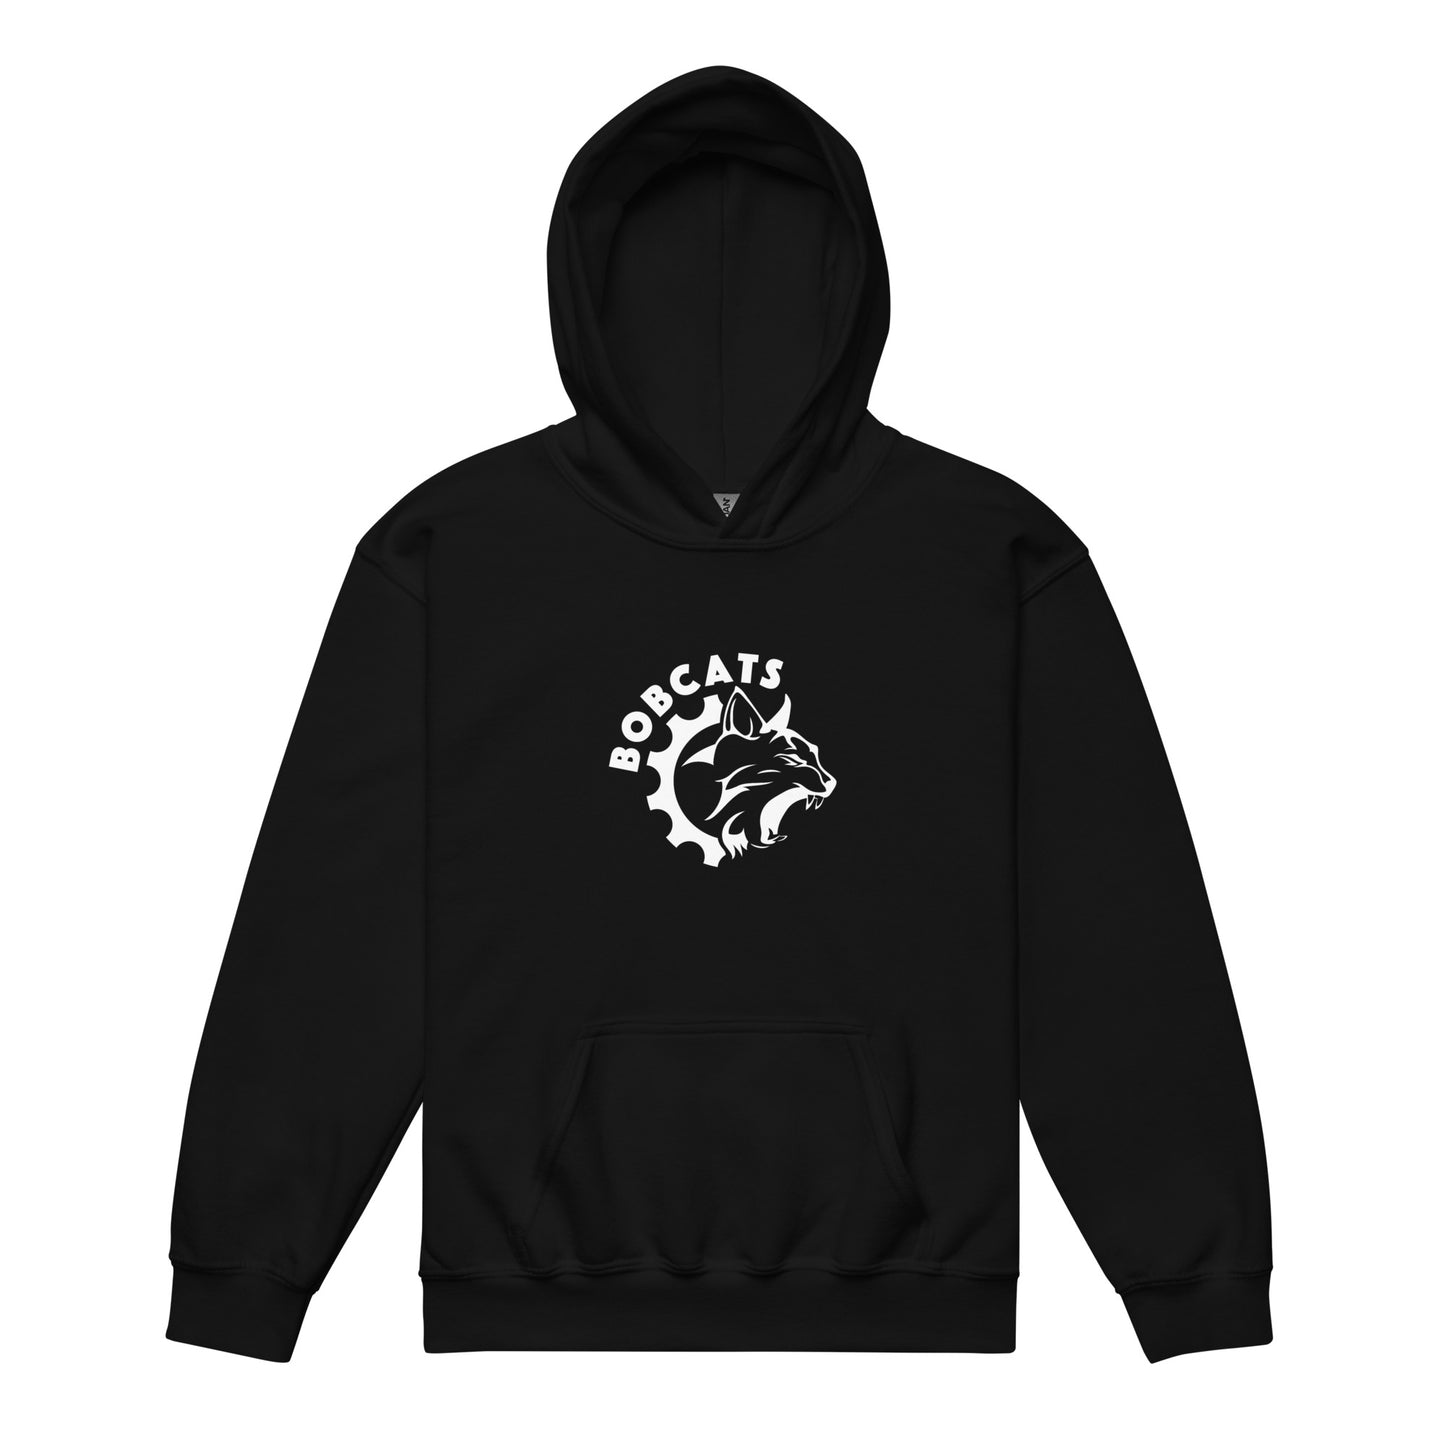 Bobcats Youth Hoodie